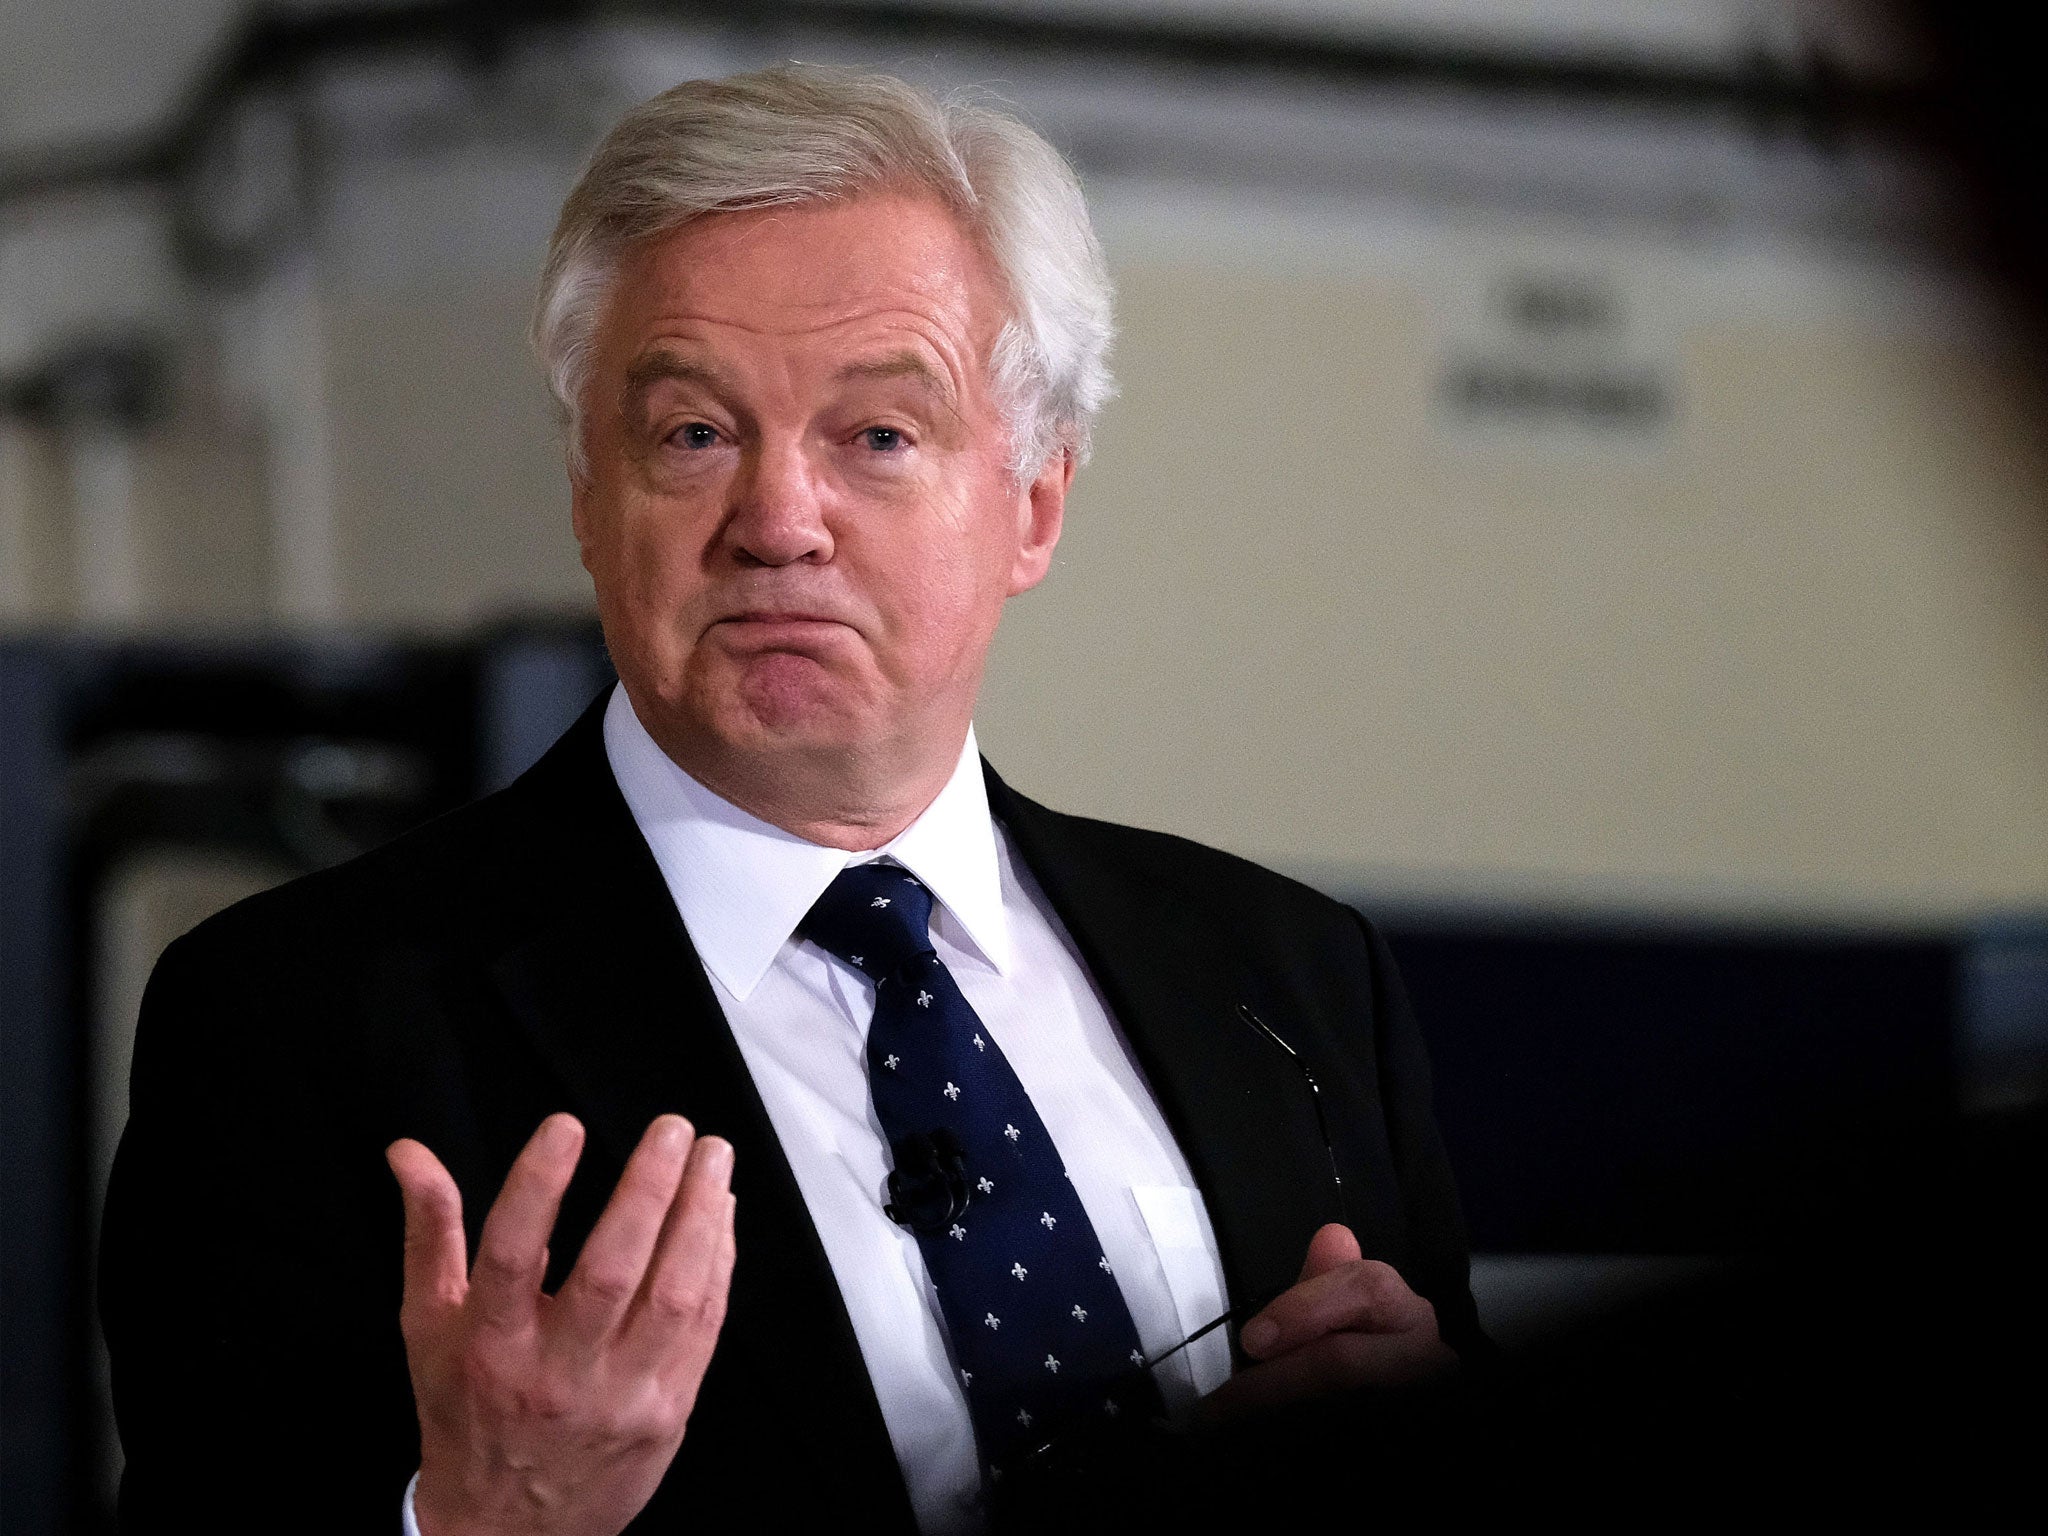 Brexit Secretary David Davis delivers a speech on the Brexit implementation period during a visit to PD Ports at Teesport in Middlesbrough